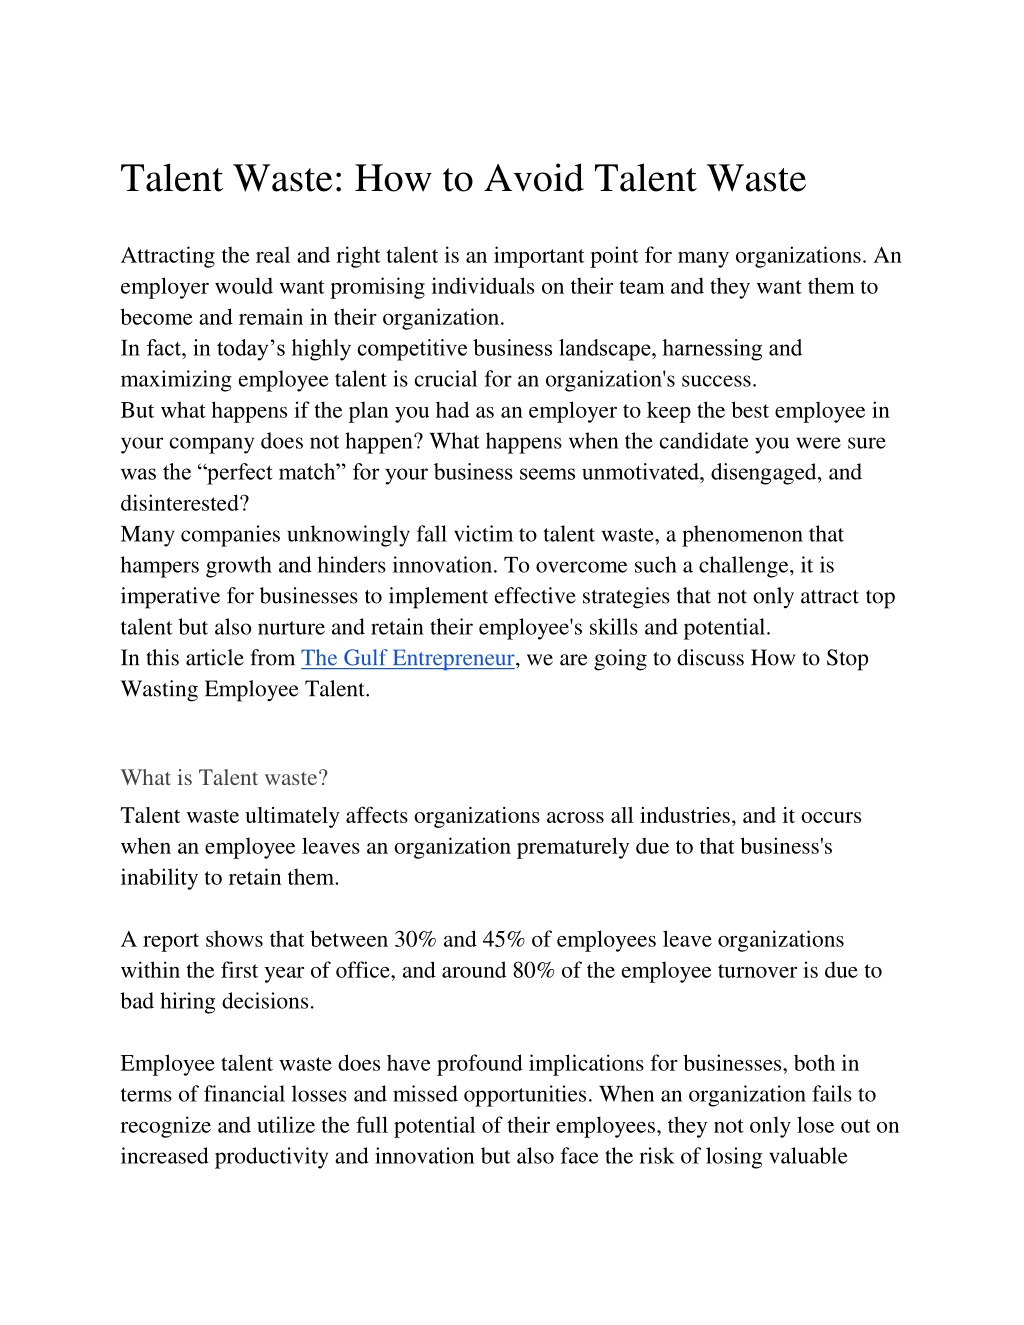 PPT - Talent Waste_ How to Avoid Talent Waste PowerPoint Presentation ...